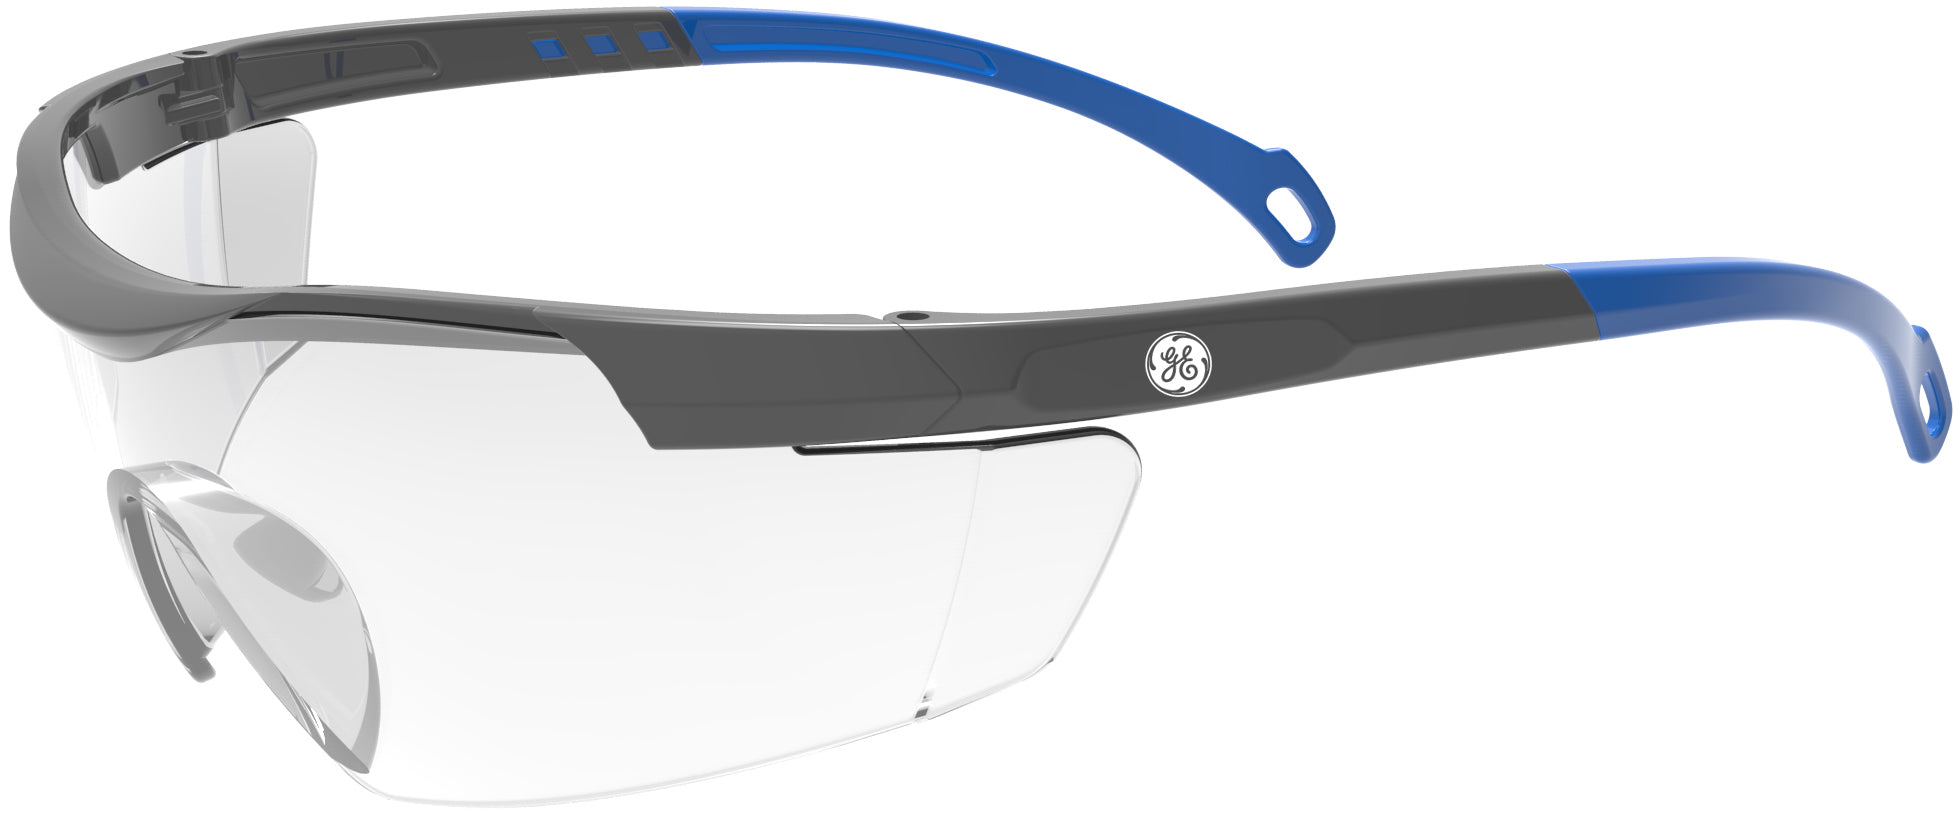 GE PPE - PROTECTIVE EYEWEAR - 01 Series Safety Glasses - #101C - Clear and I/O Reflective